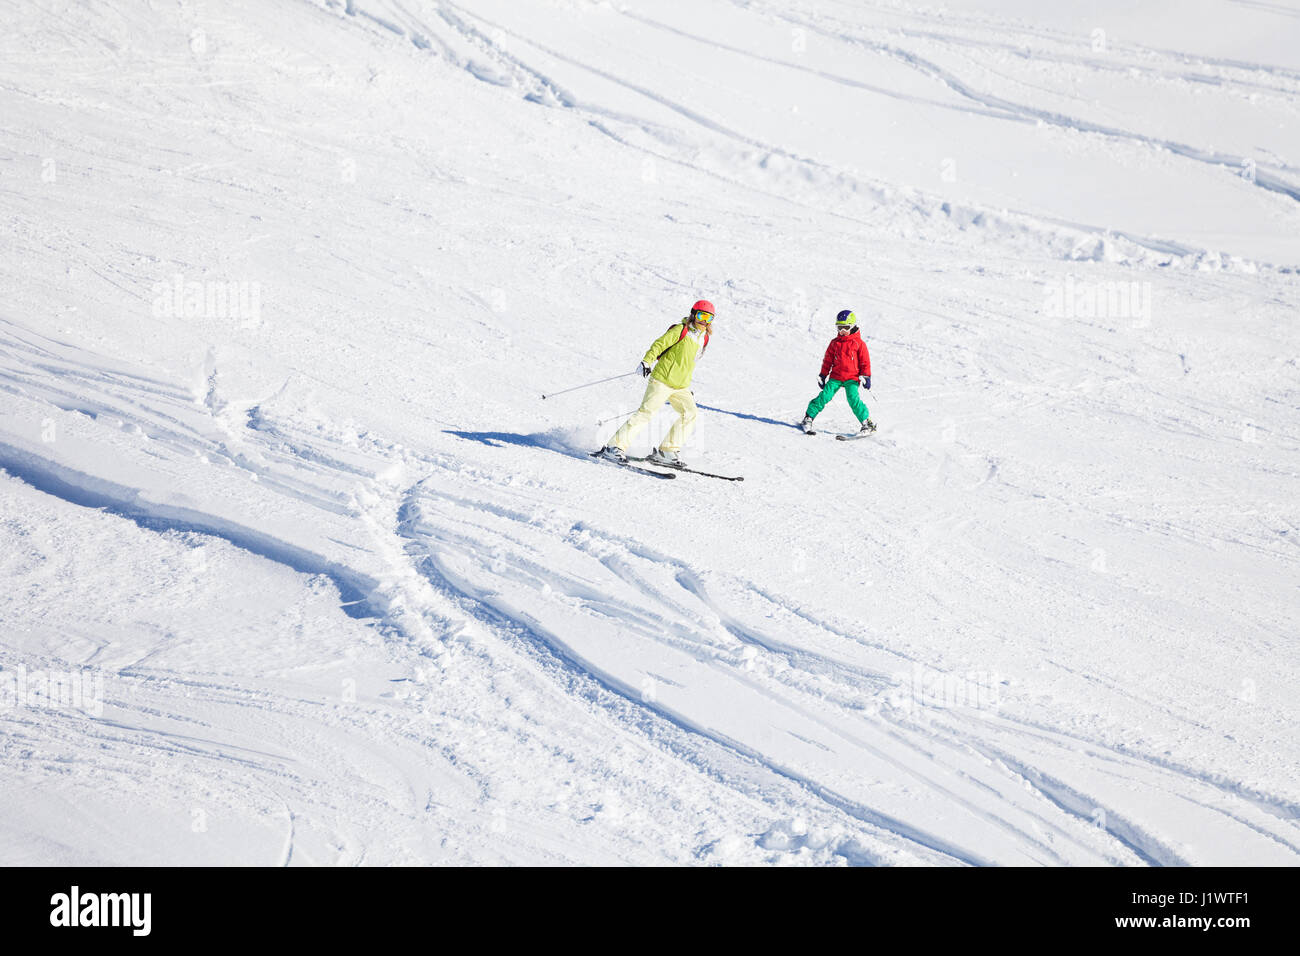 Active family, woman and boy in skiing suits, hitting the slope at snowy mountains Stock Photo